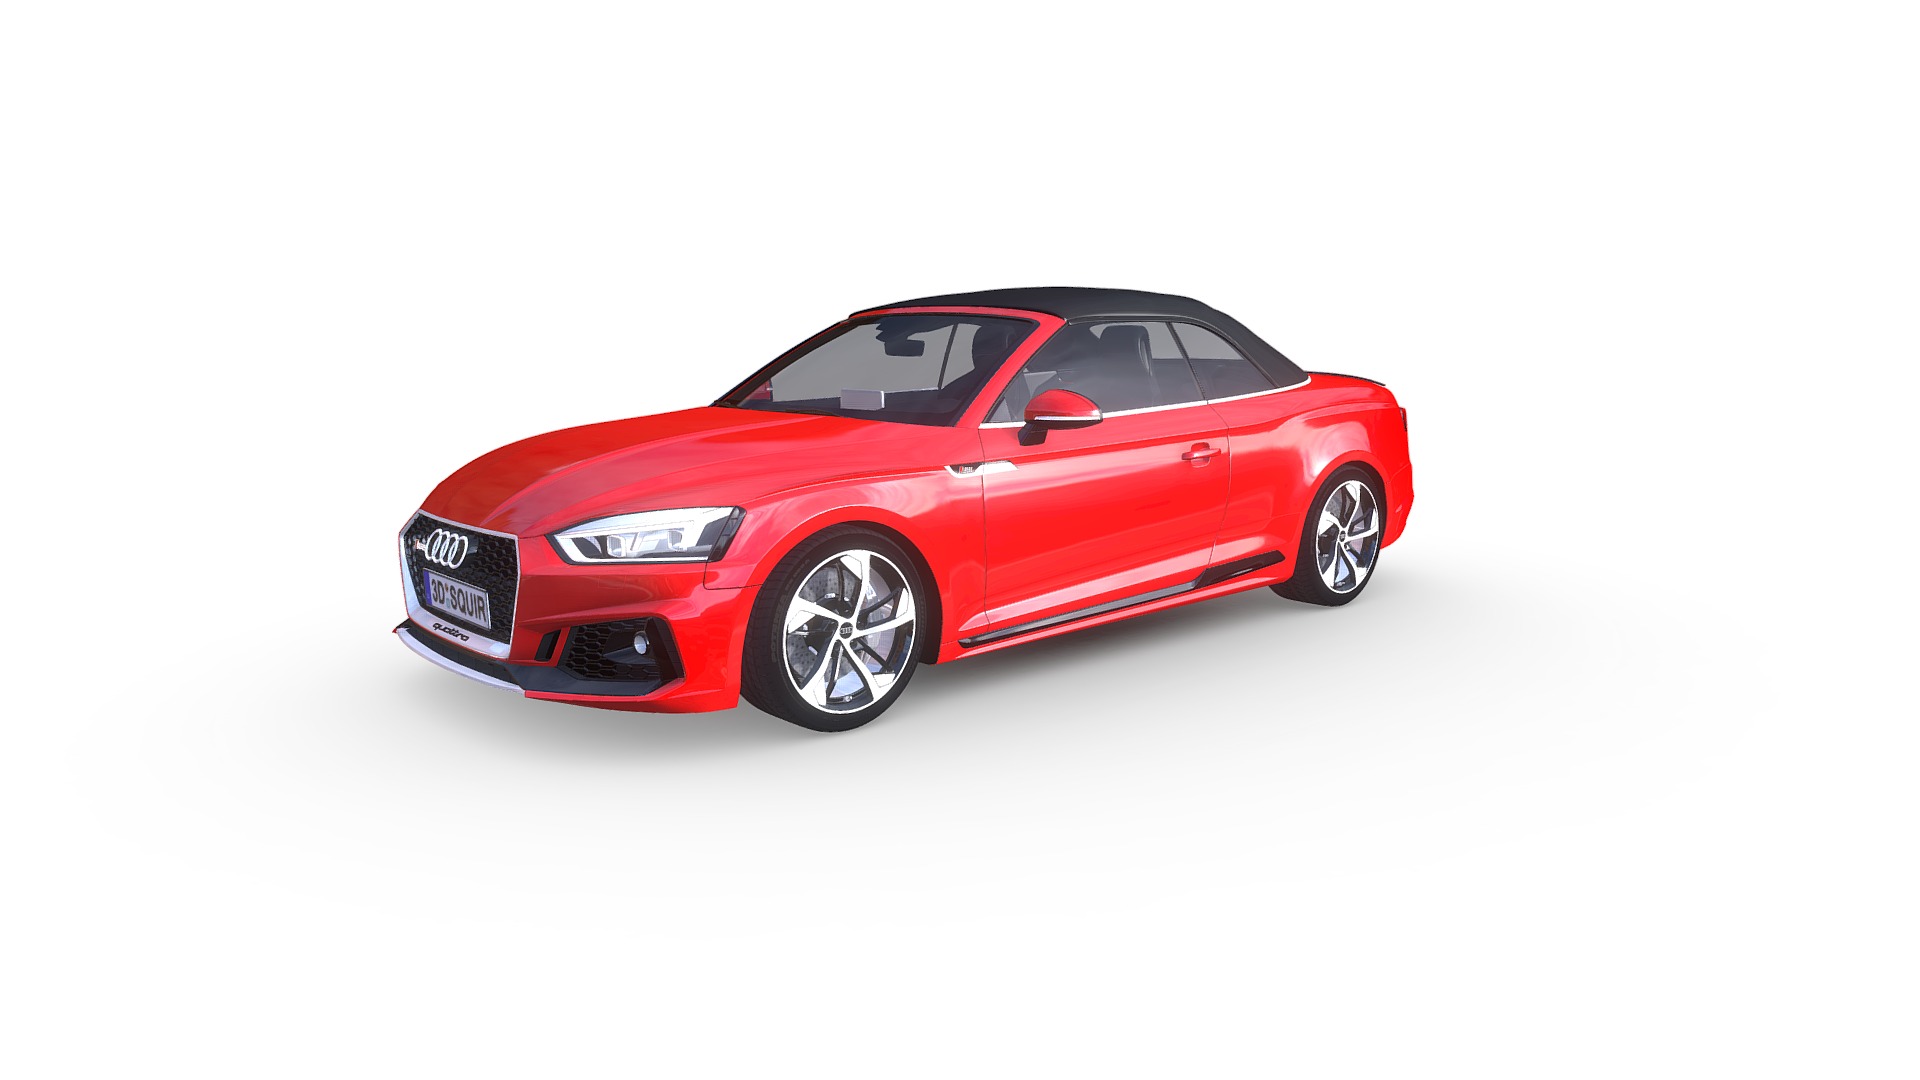 3D model Audi Rs5 Cabriolet 2019 - This is a 3D model of the Audi Rs5 Cabriolet 2019. The 3D model is about a red car with a white background.